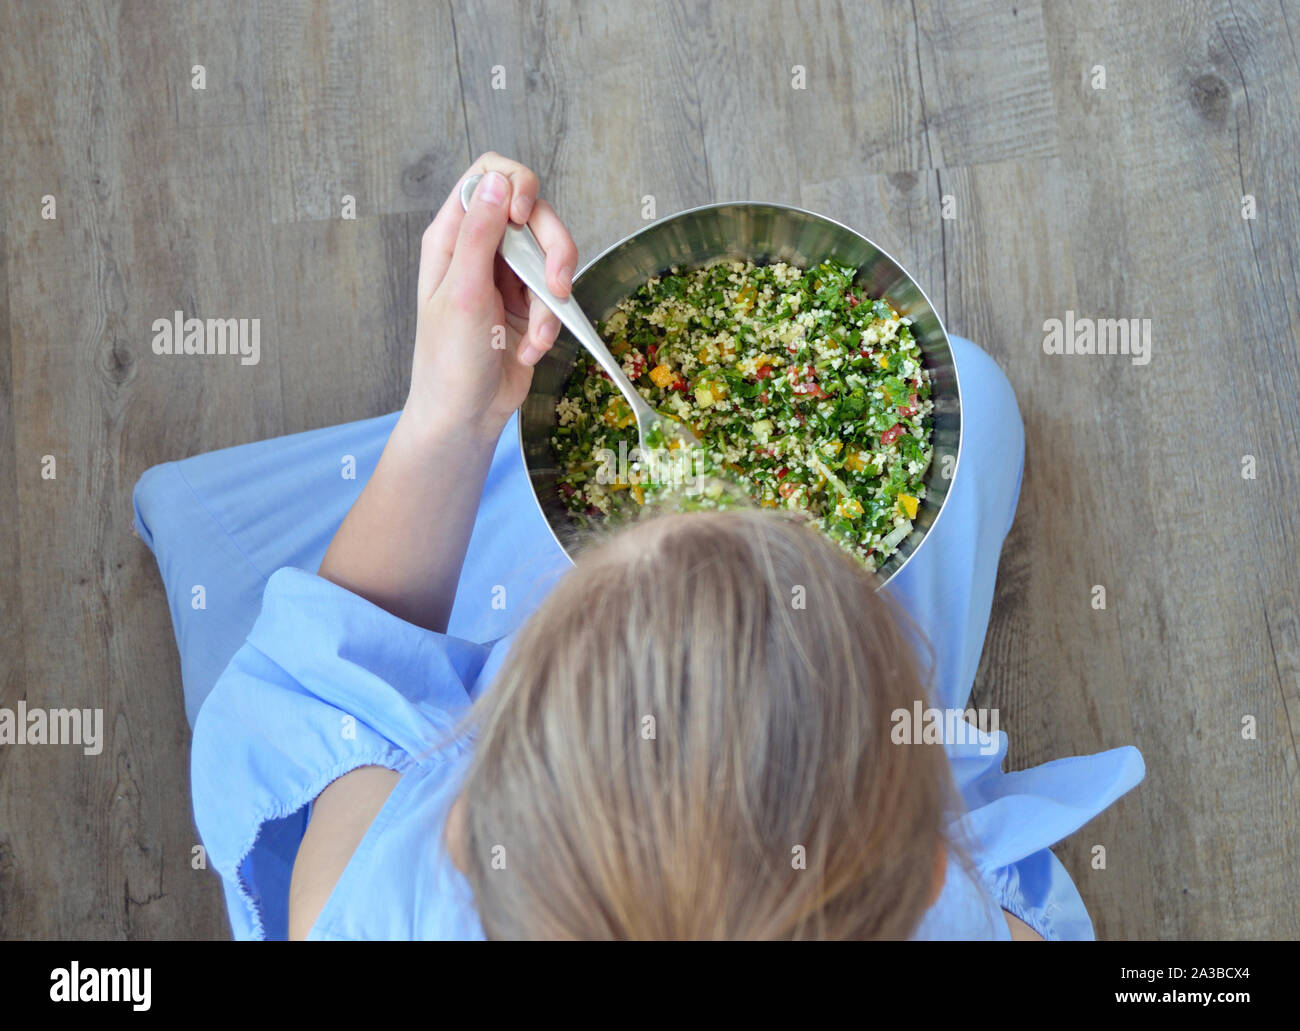 High angle shot of girl eating from a bowl of salad Stock Photo